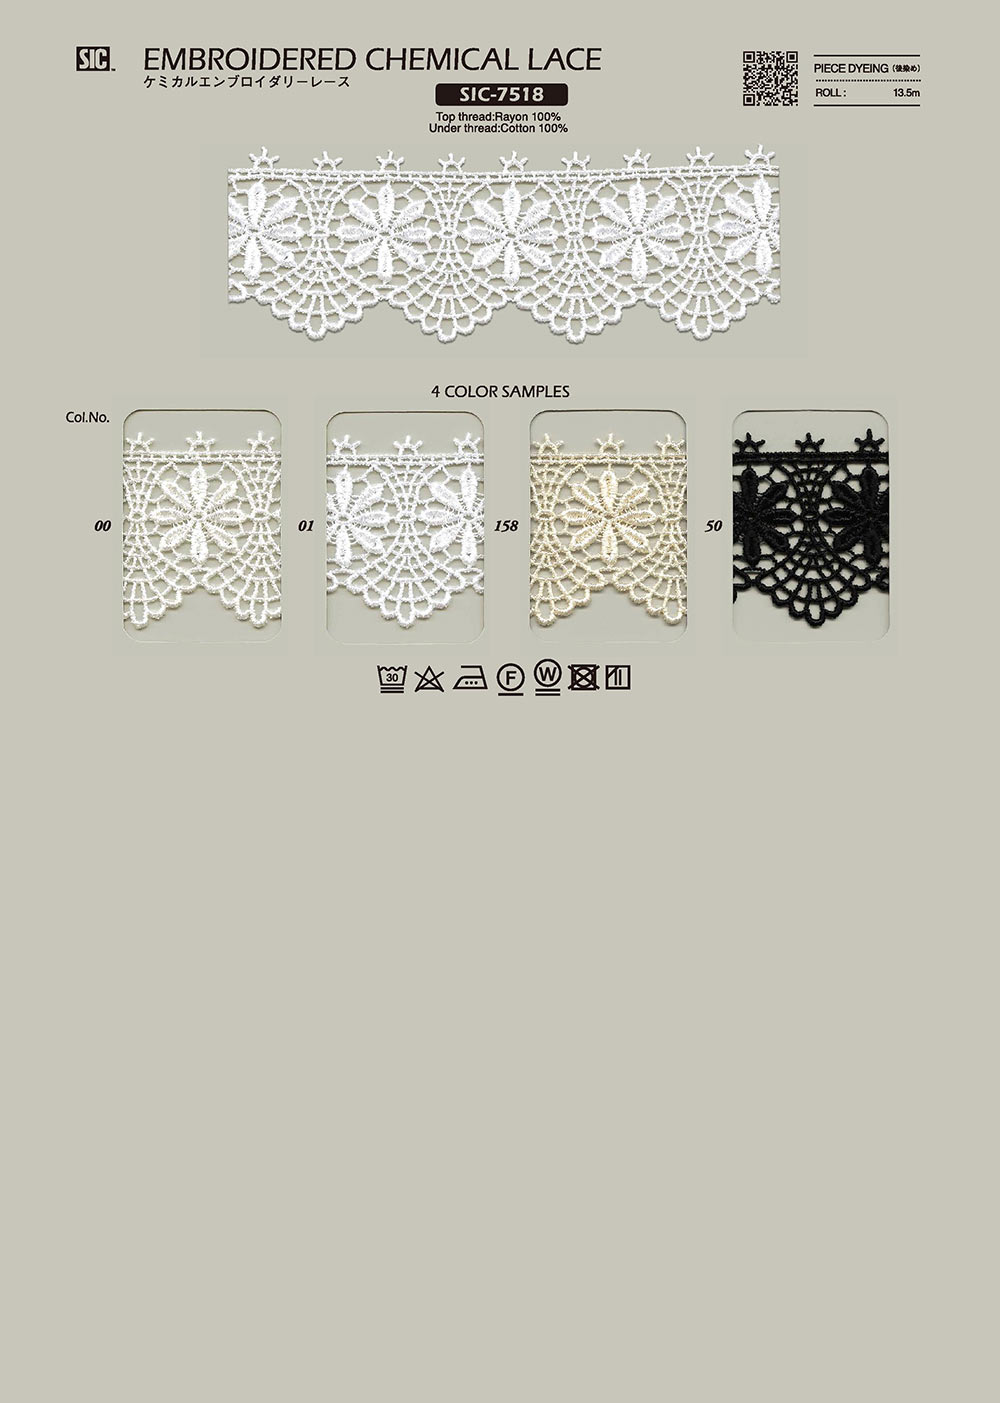 SIC-7518 Chemical Embroidery Lace/ 40mm SHINDO(SIC)